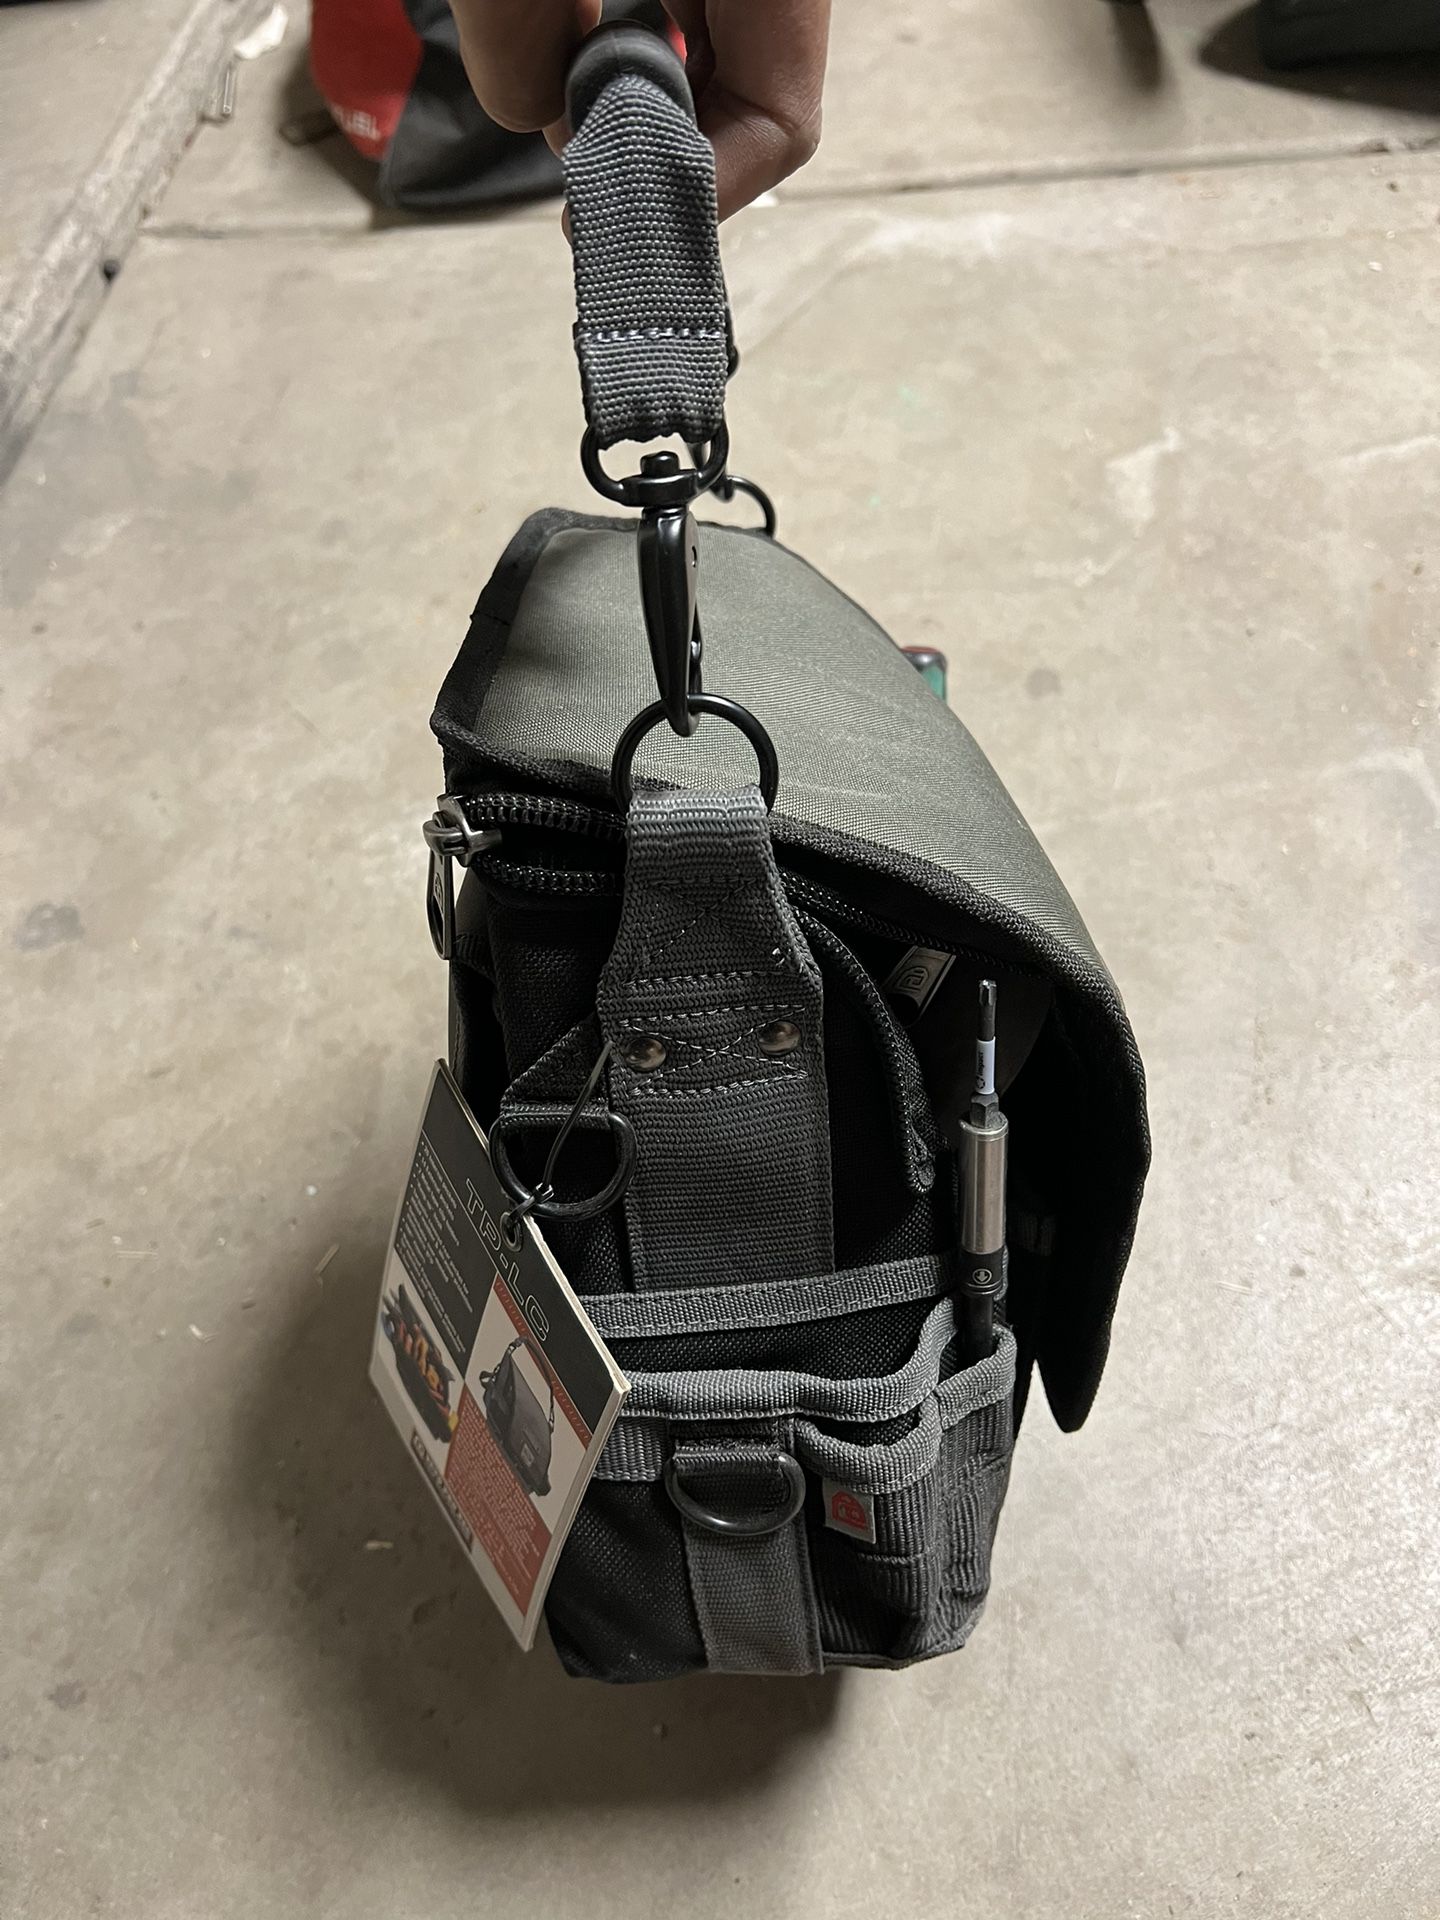 Electricians, Veto pro pac Lc - tools - by owner - sale - craigslist